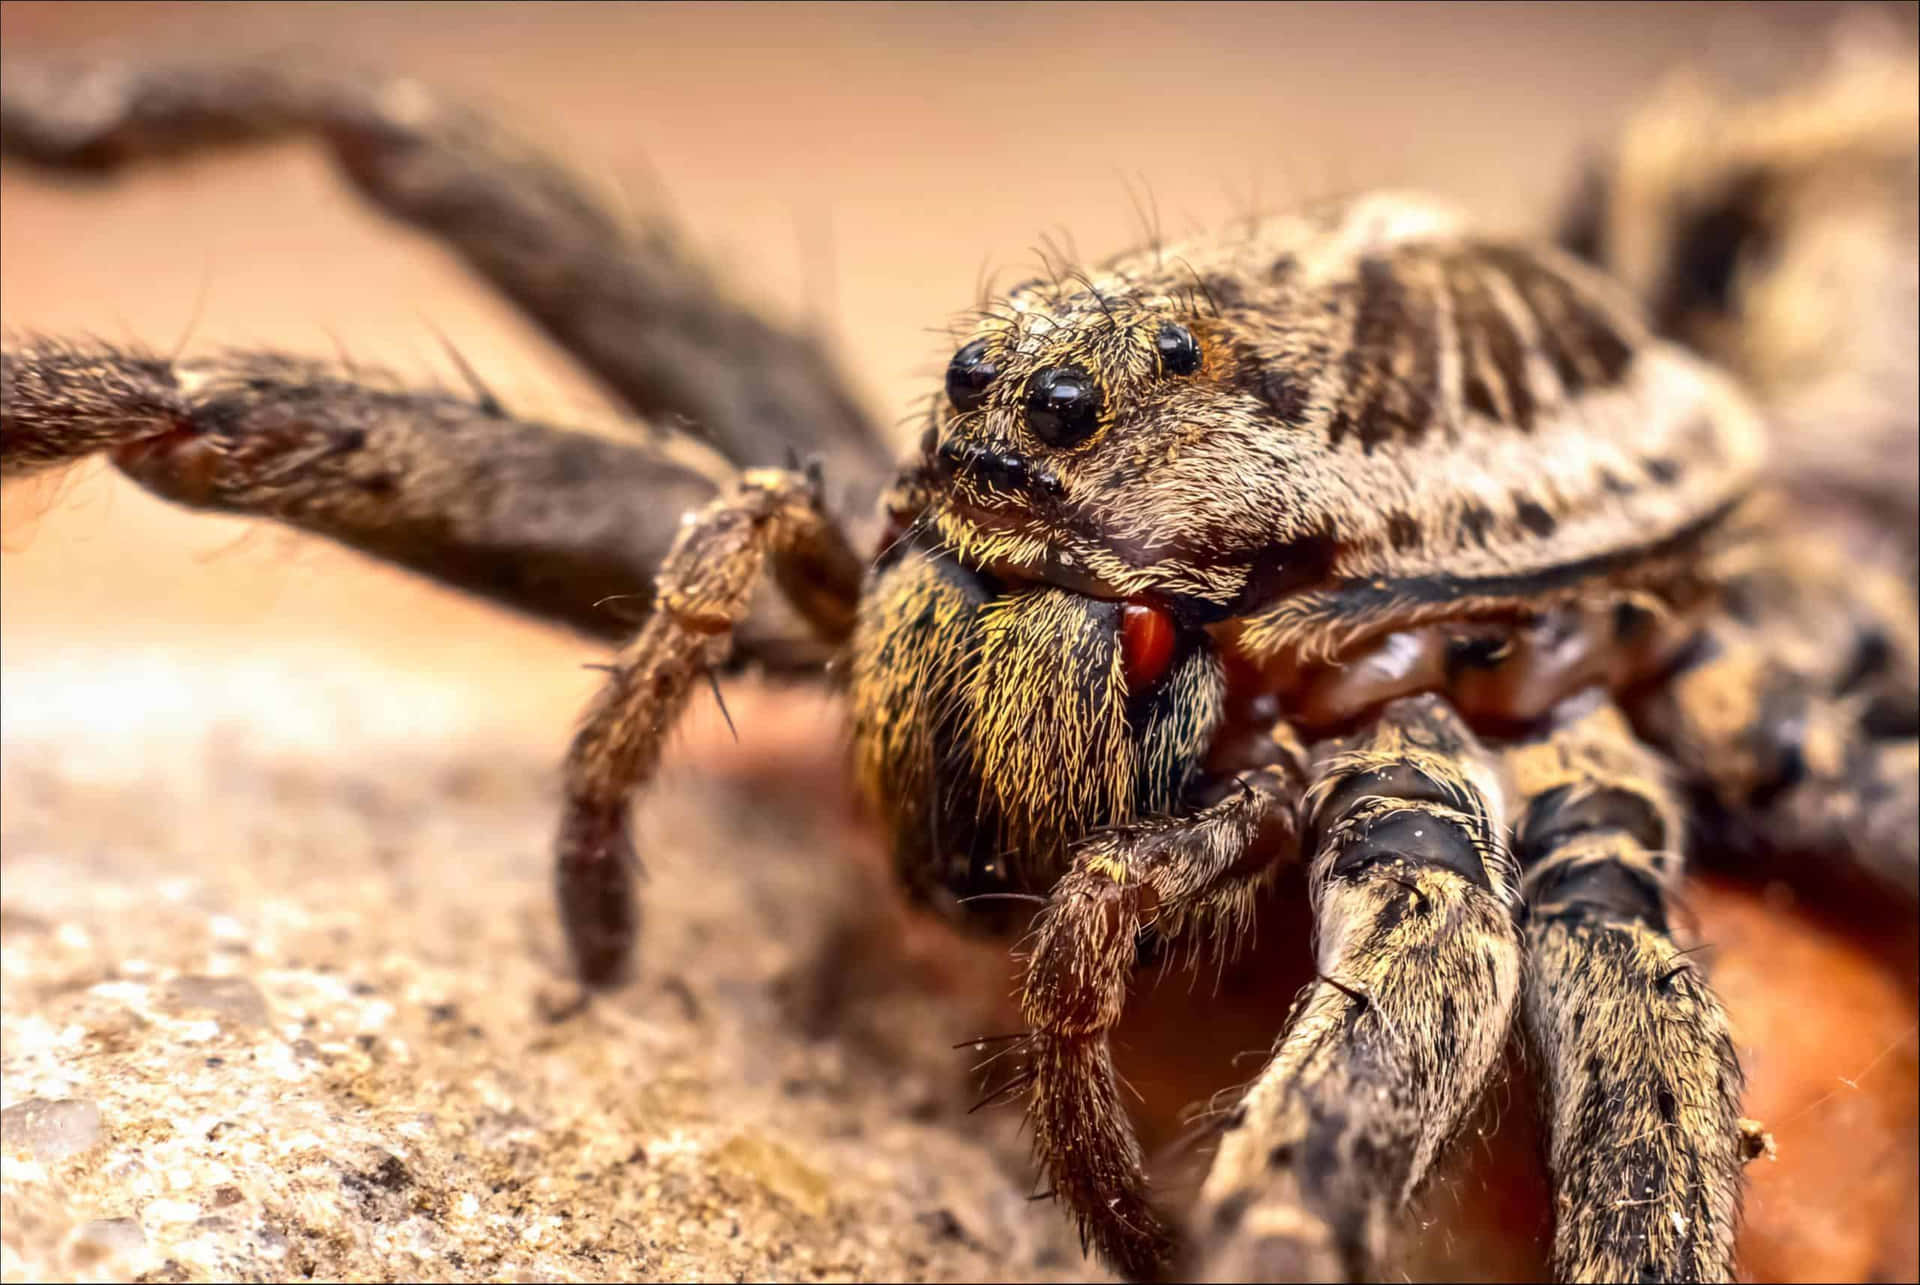 A Close Up Of A Spider On A Rock